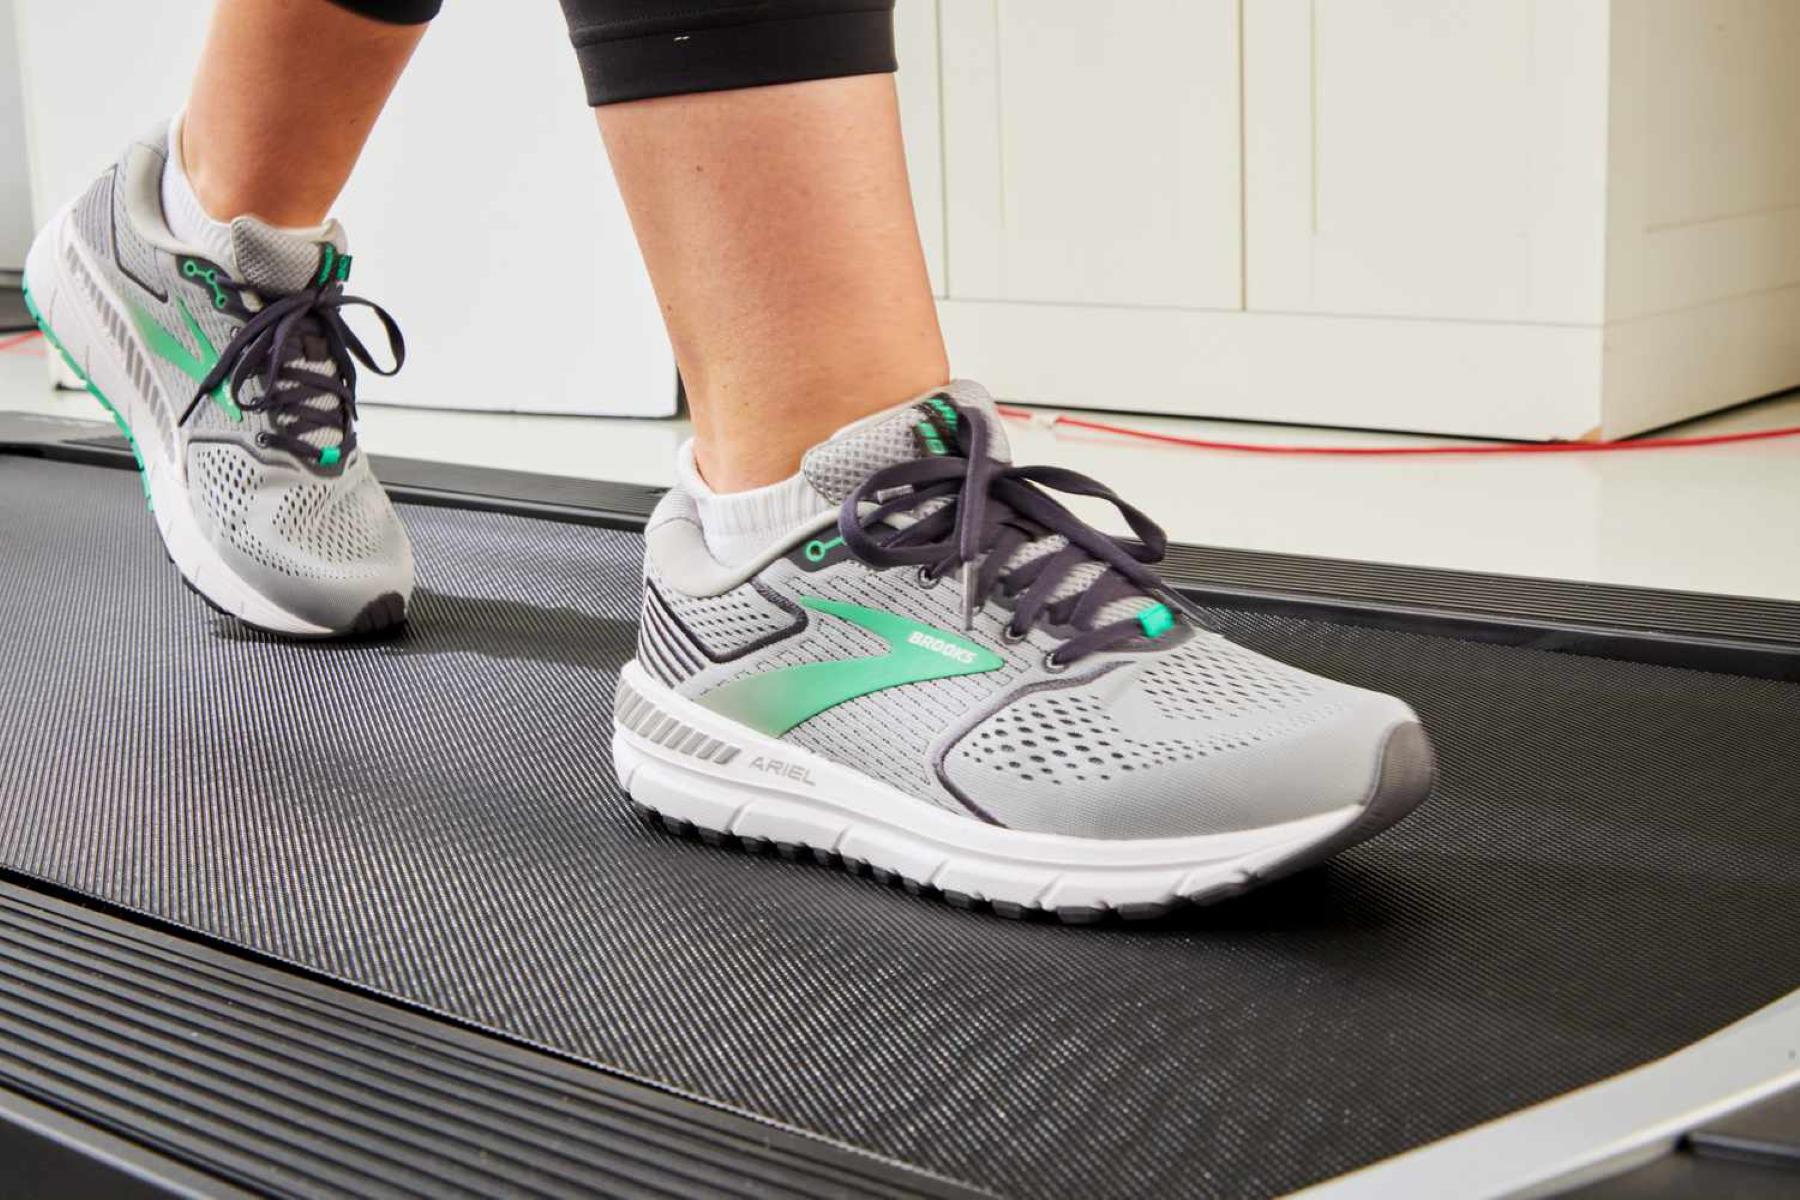 What Are The Best Shoes For Treadmill